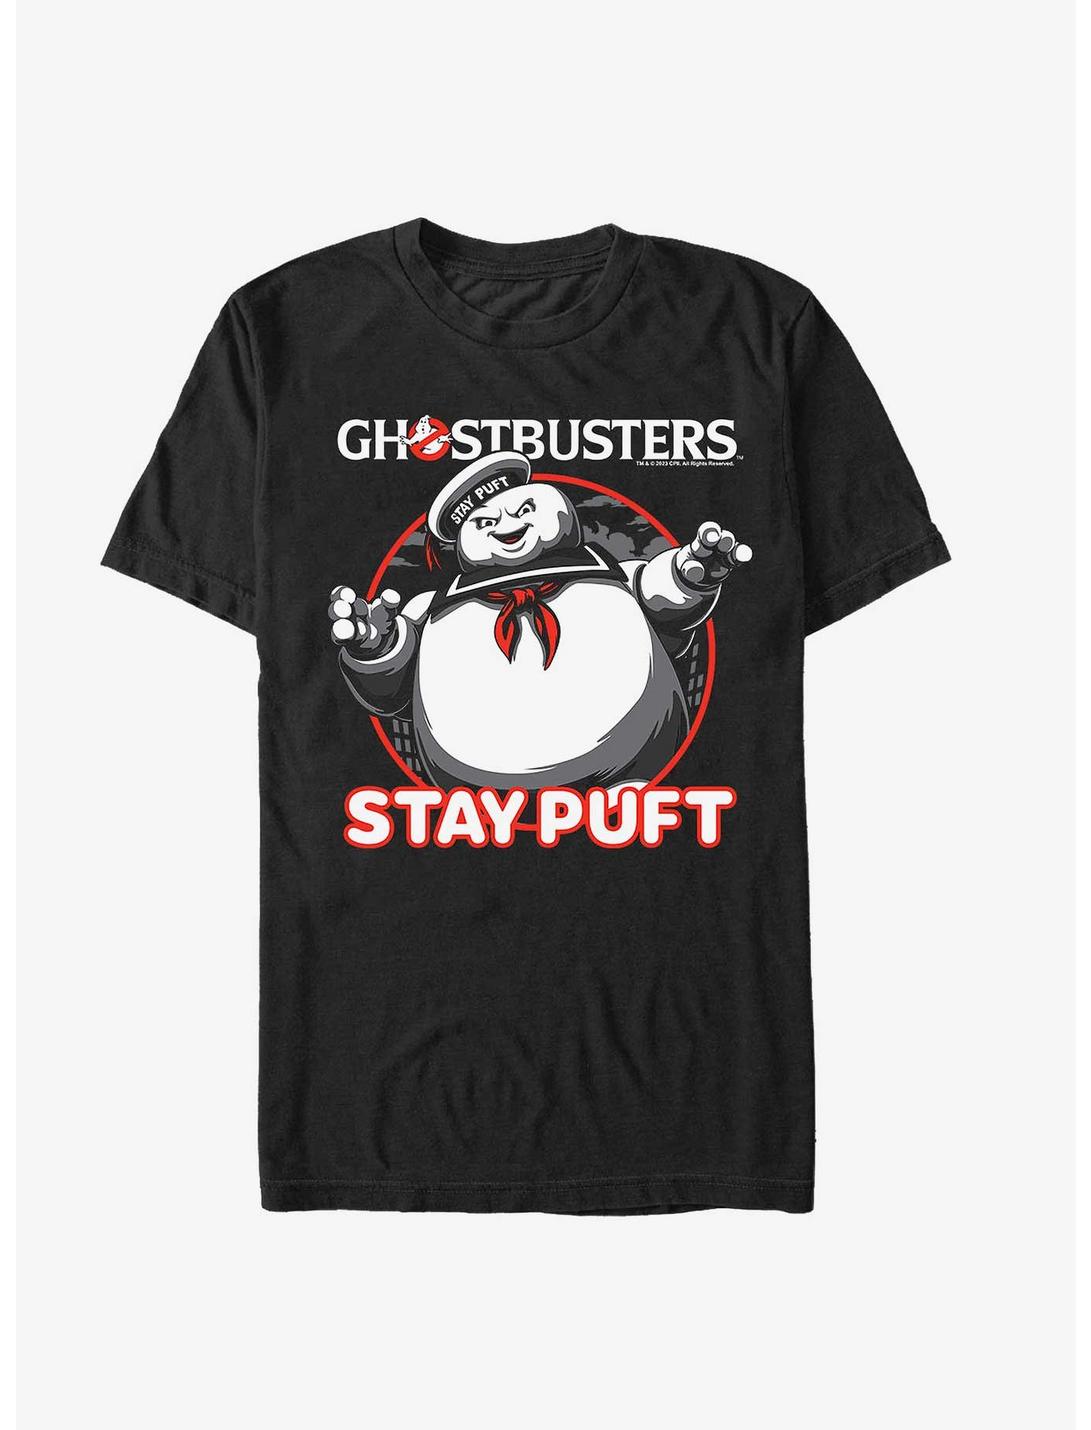 Ghostbusters Stay Puft Classic T-Shirt, BLACK, hi-res